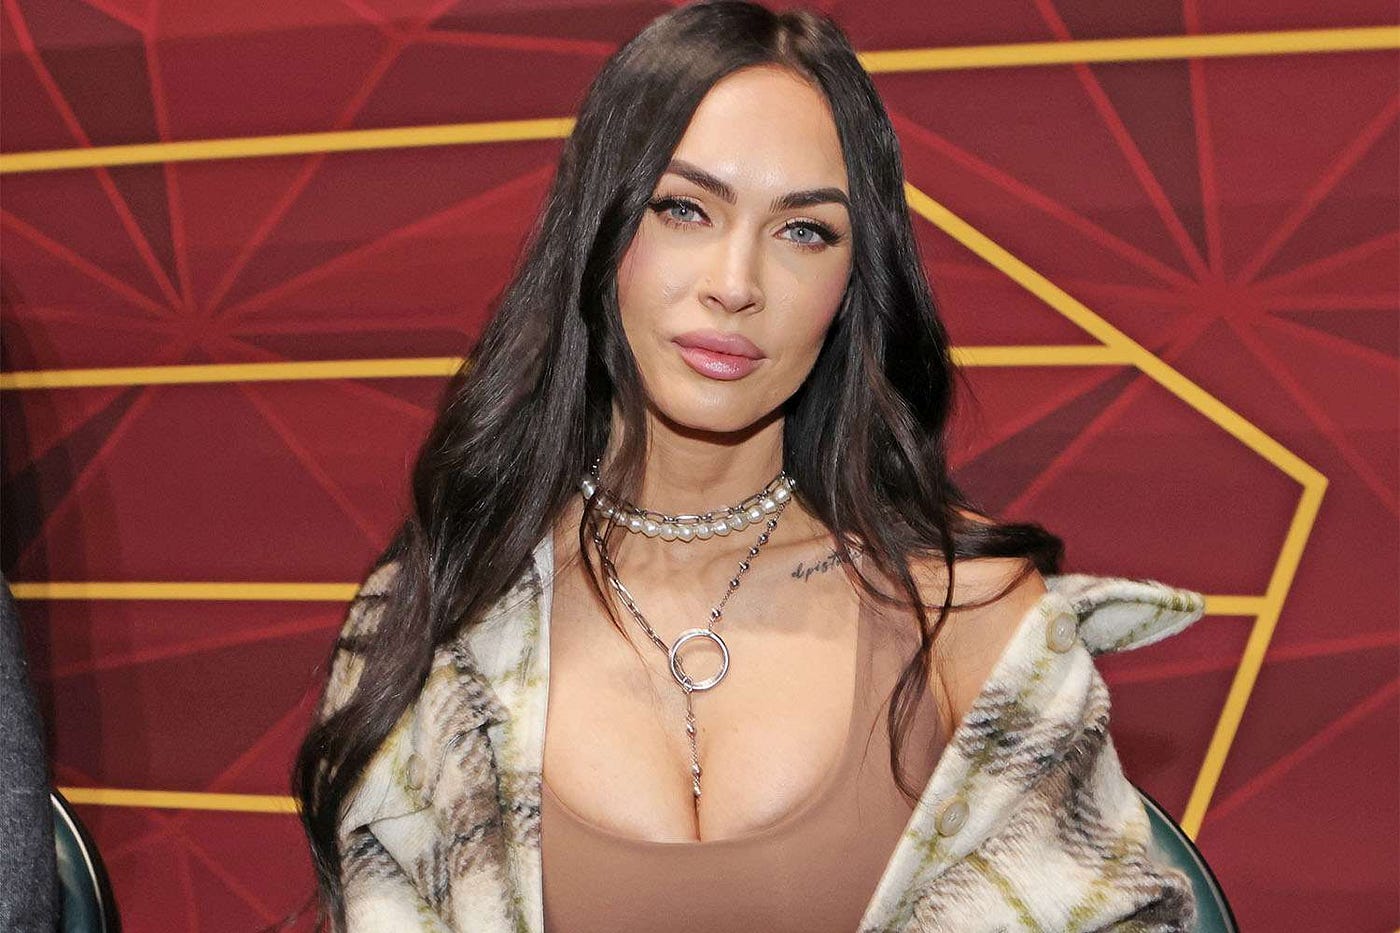 Ebony Whore Megan Fox - latest News: According to fans, this is the biggest stinker of Megan Fox's  career. By 1o1 News | by Clicking Studio | Medium